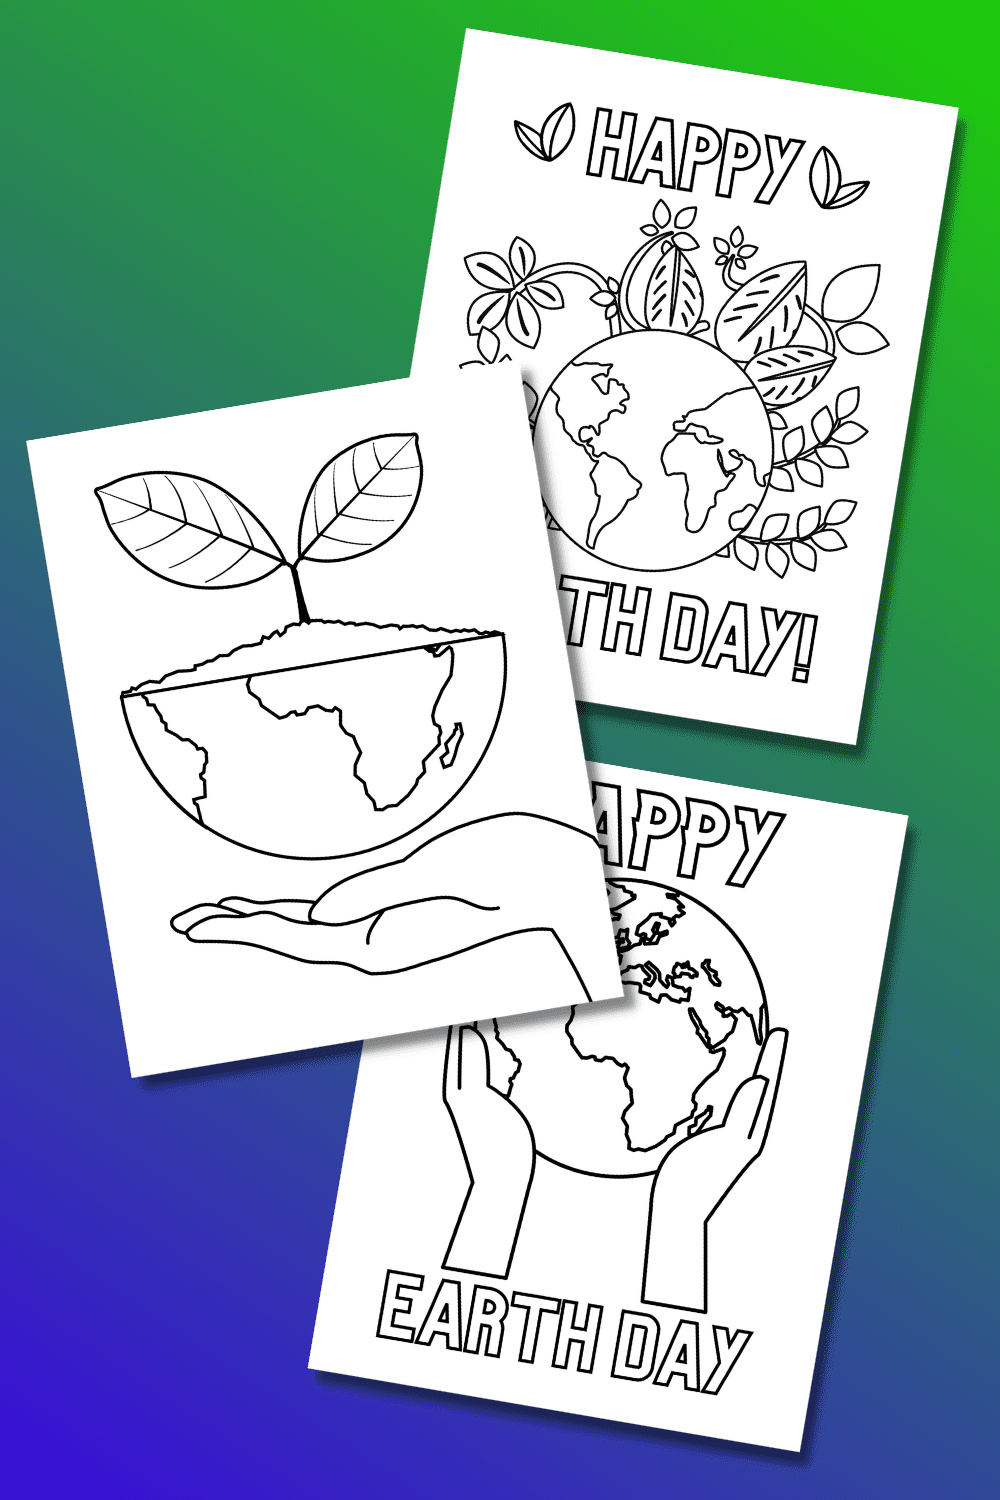 https://www.prudentpennypincher.com/wp-content/uploads/2023/03/earth-day-coloring-pages-for-kids2.png